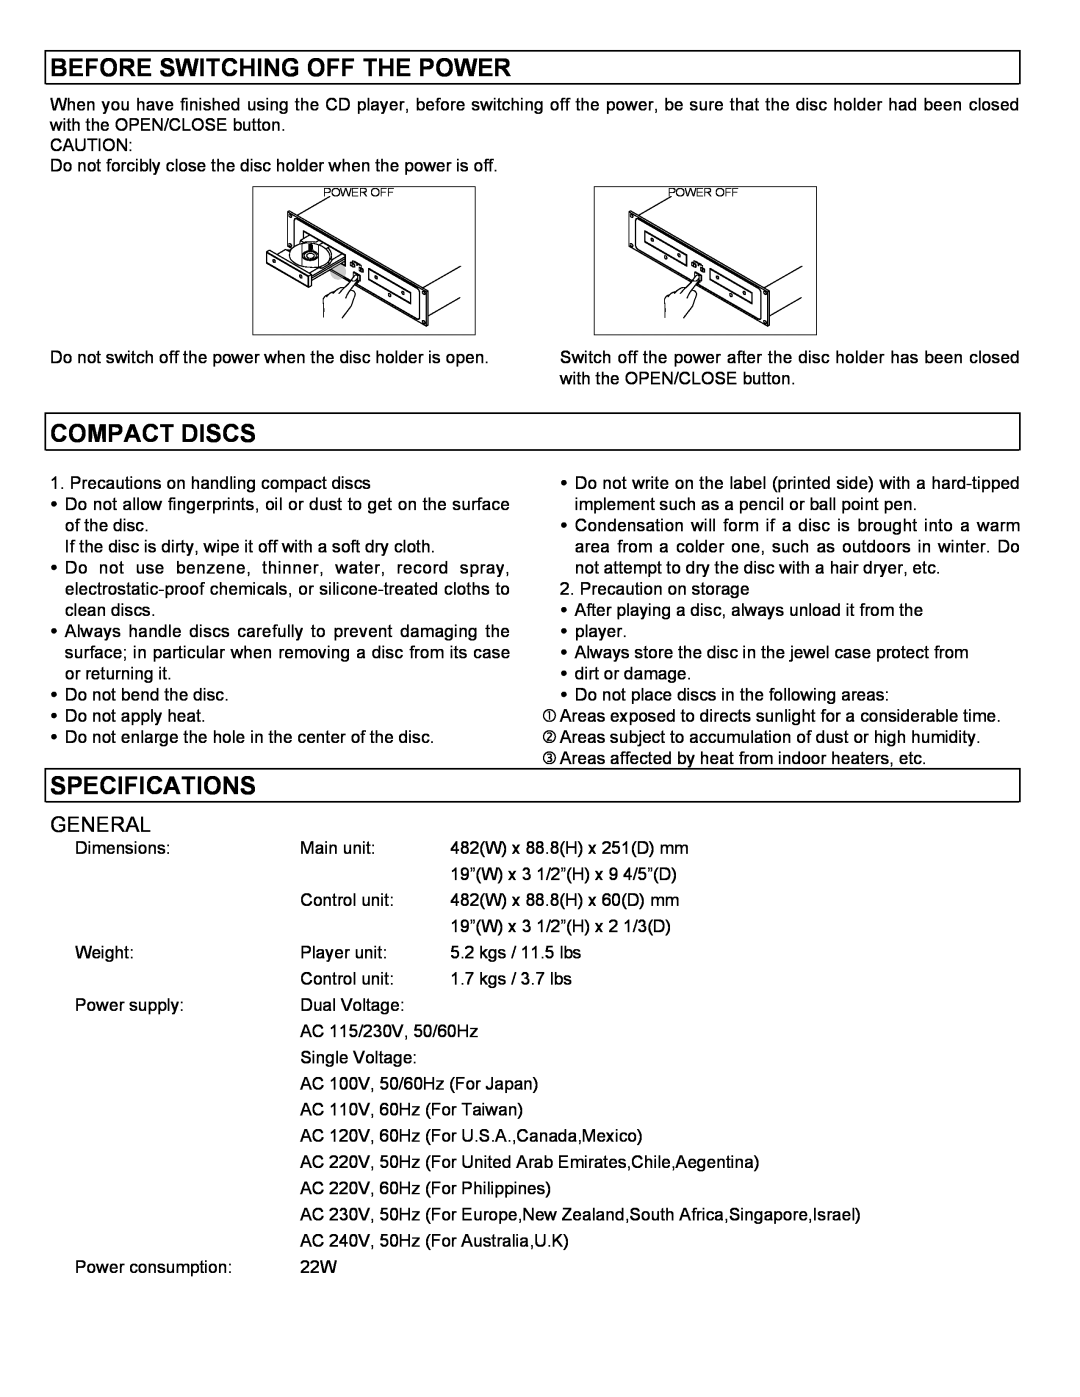 Stanton C-500 user manual Before Switching Off The Power, Compact Discs, Specifications, General 